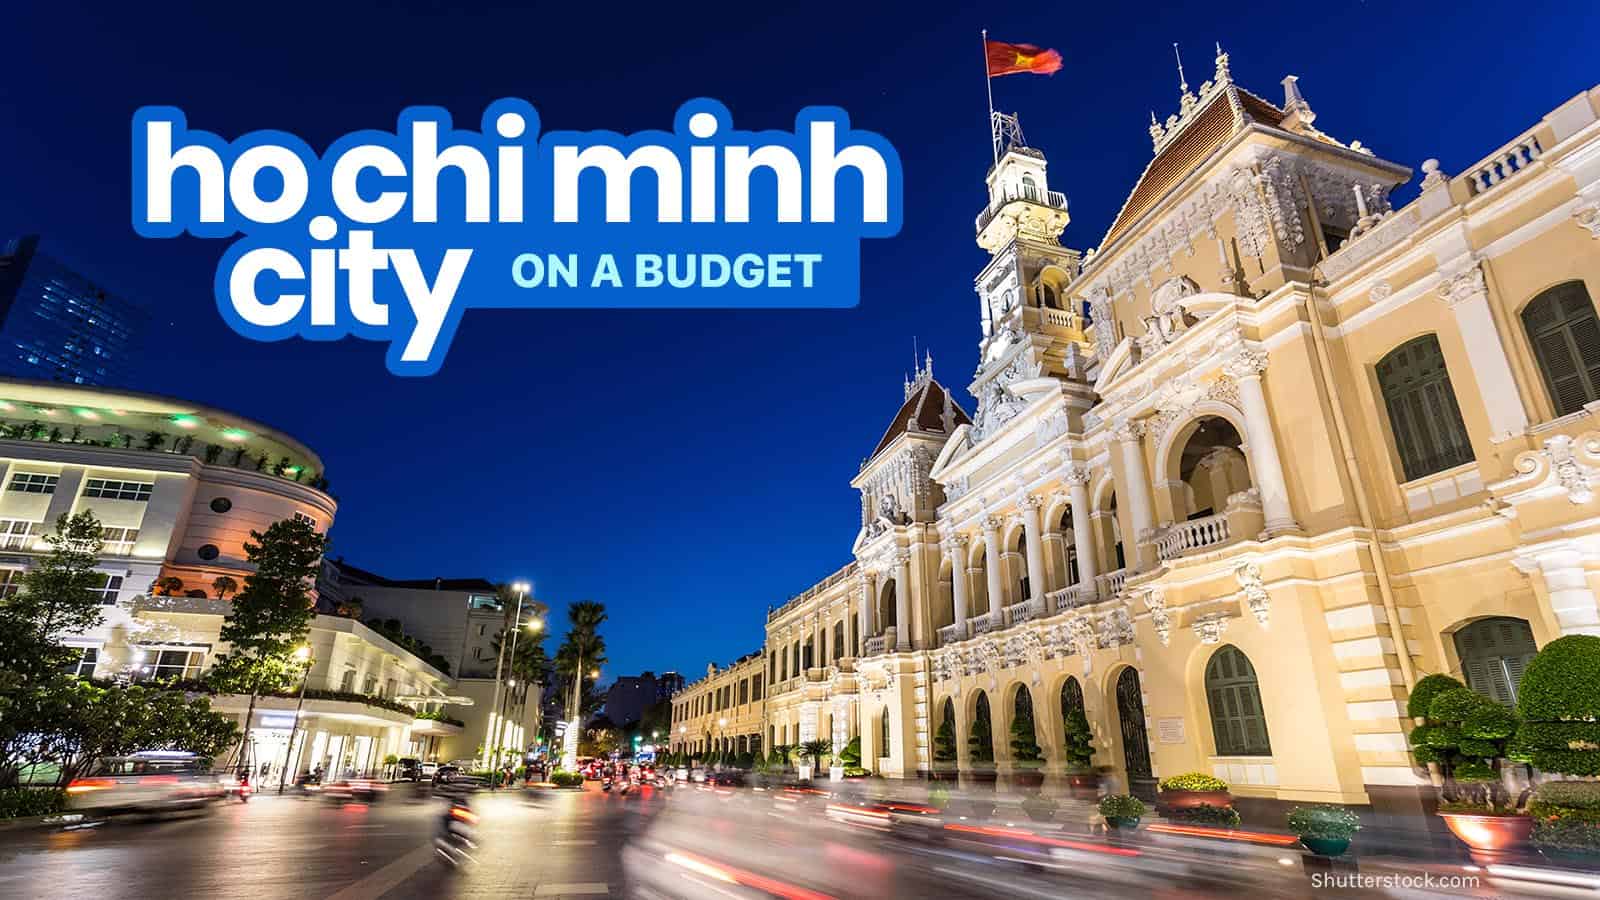 HO CHI MINH CITY Travel Guide: Budget, Itinerary, Things Do | The Poor Traveler Itinerary